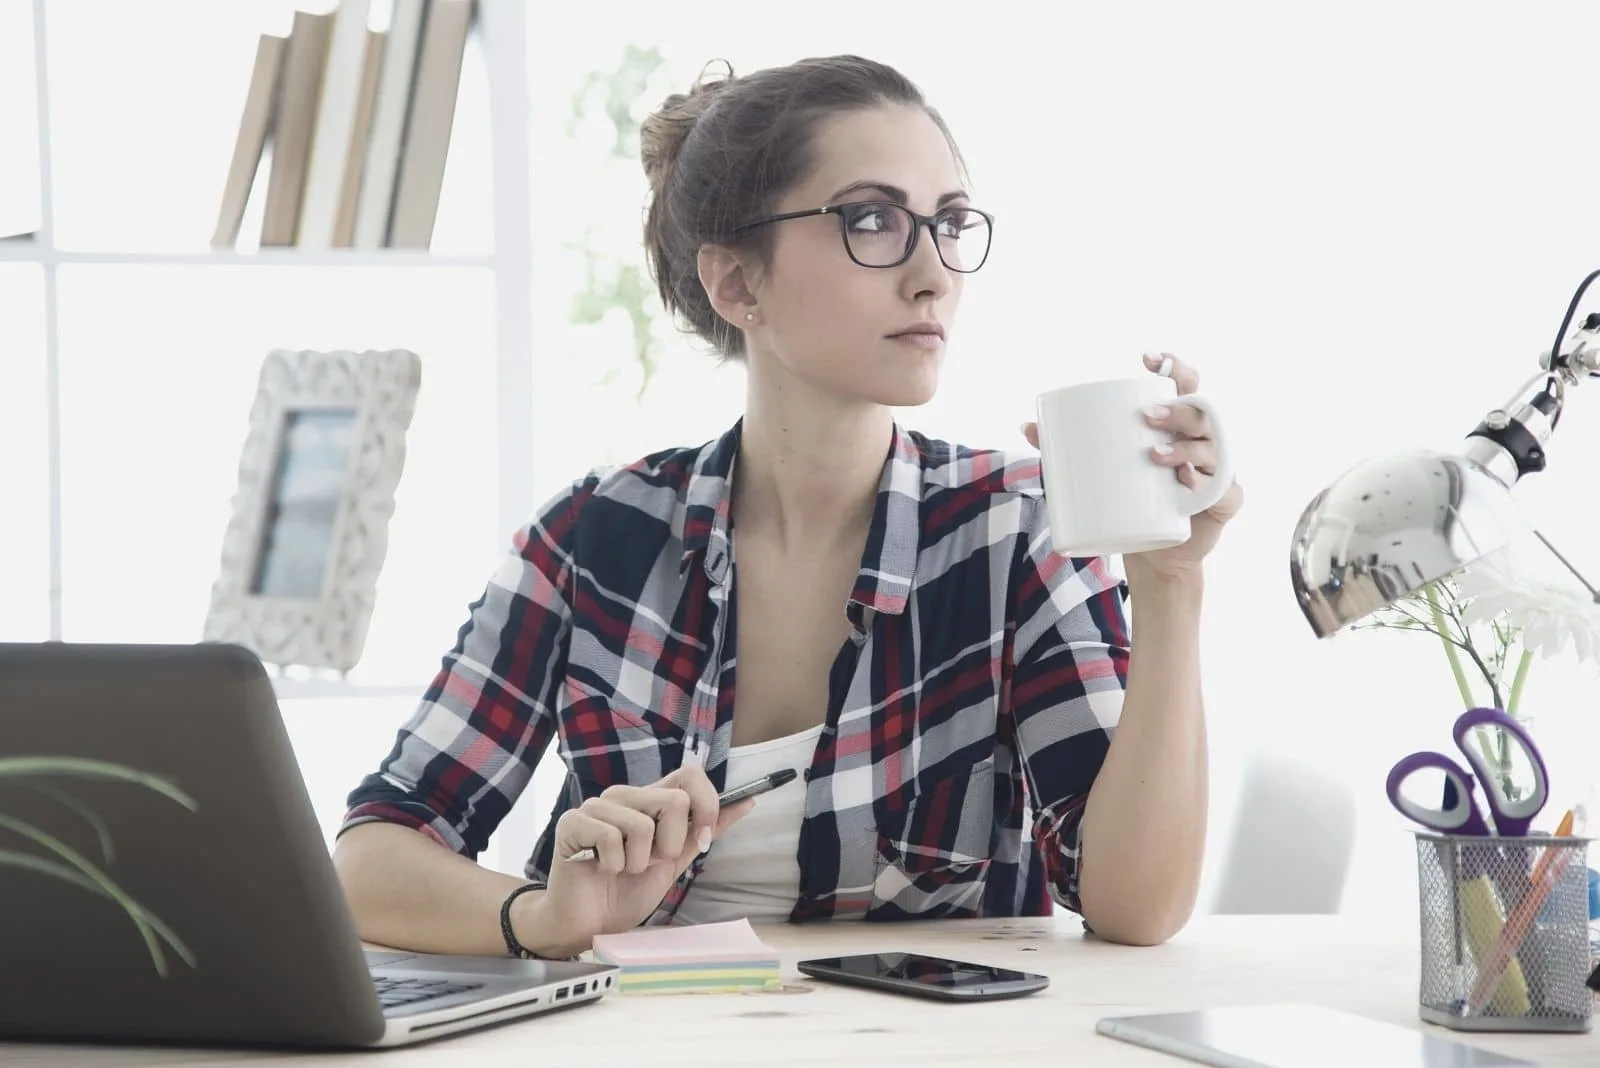 woman sitting in office thinking and looking away wearing eyeglasses and drinking from a mug